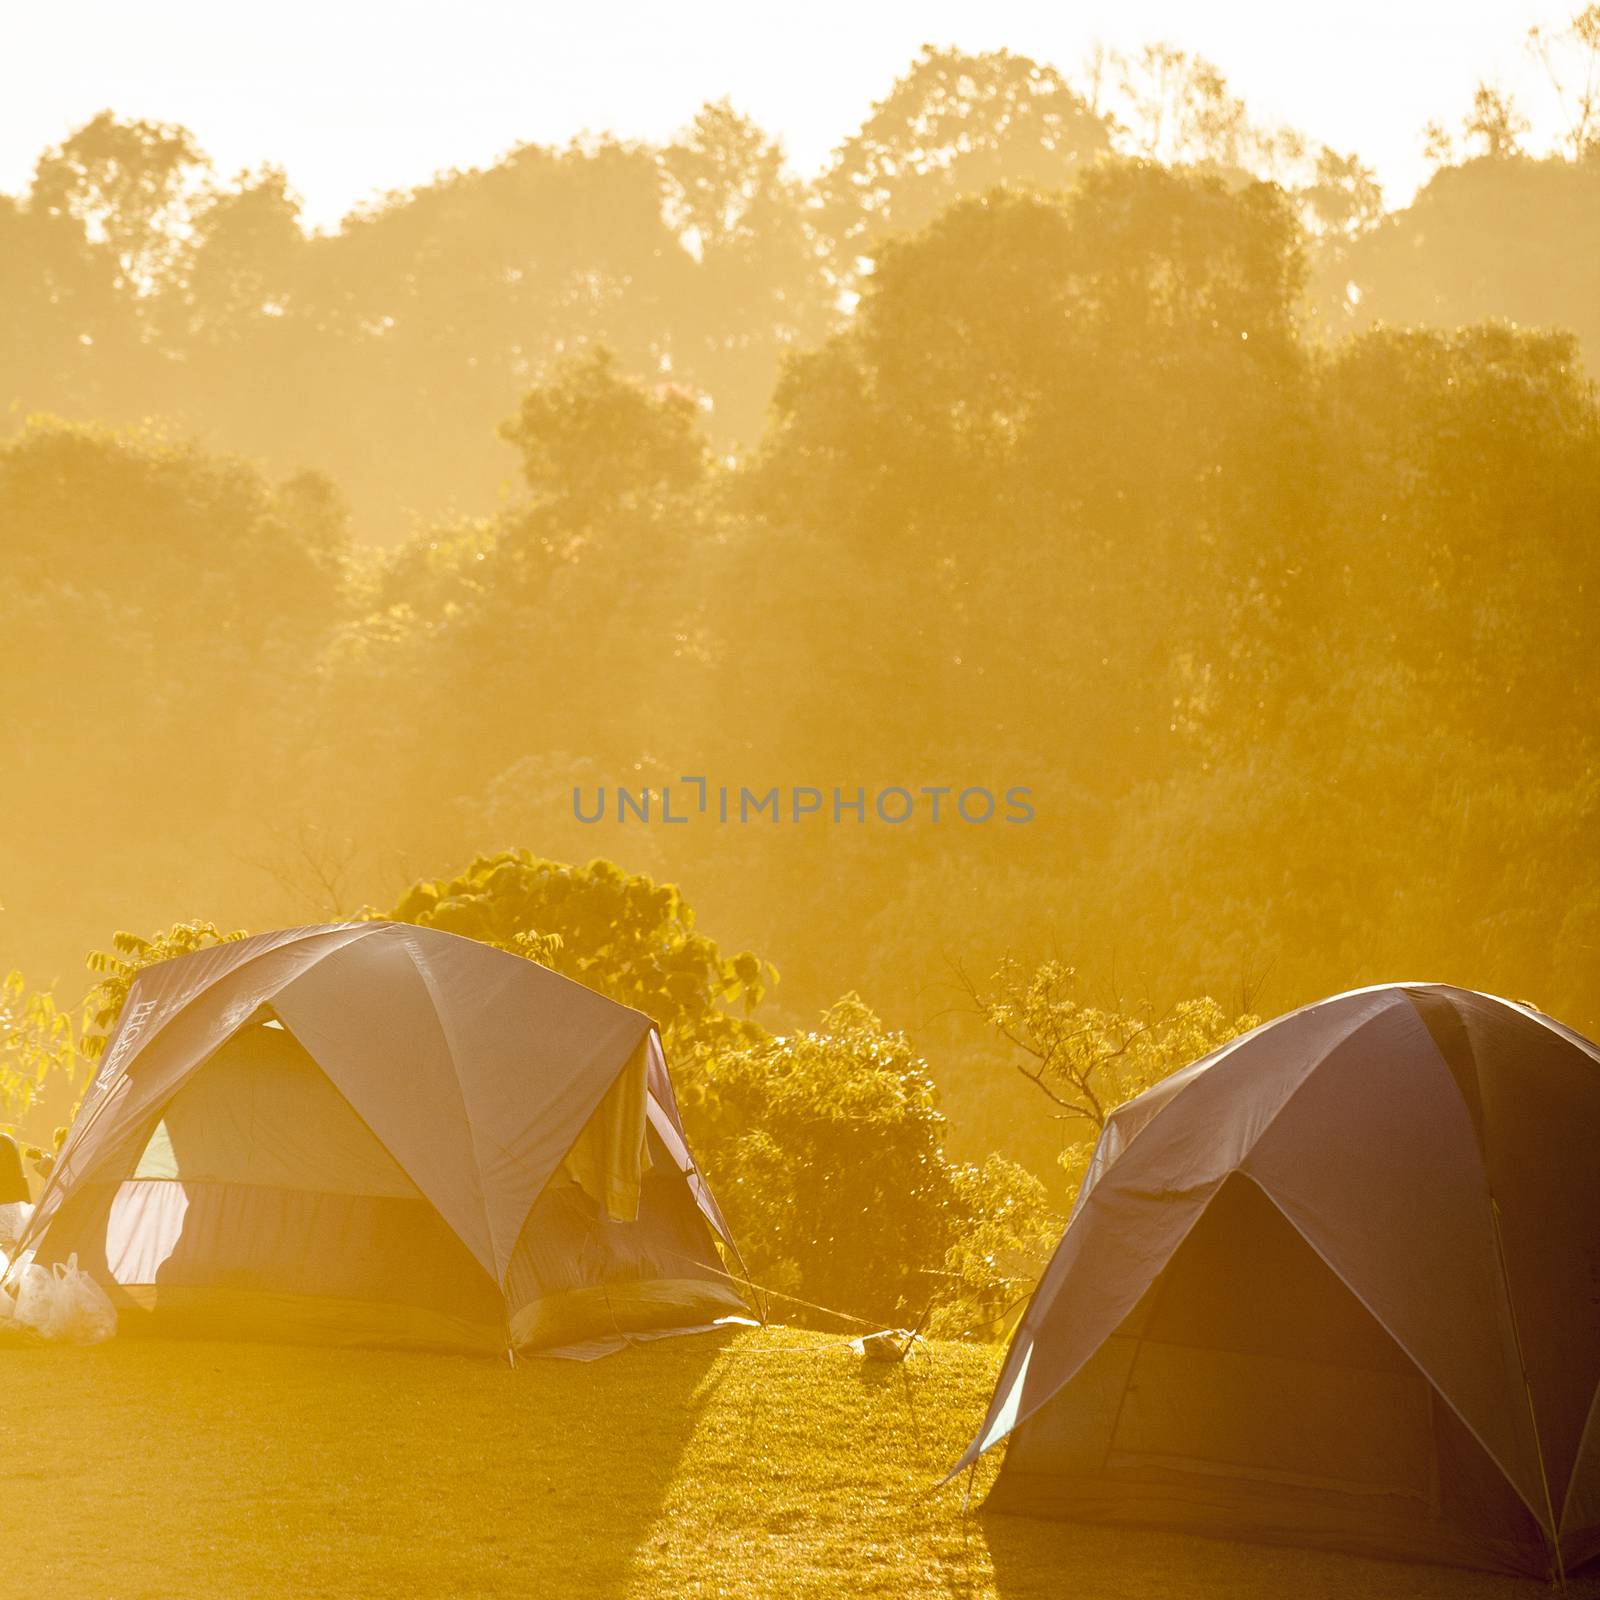 Camping tents on mountain morning by 2nix